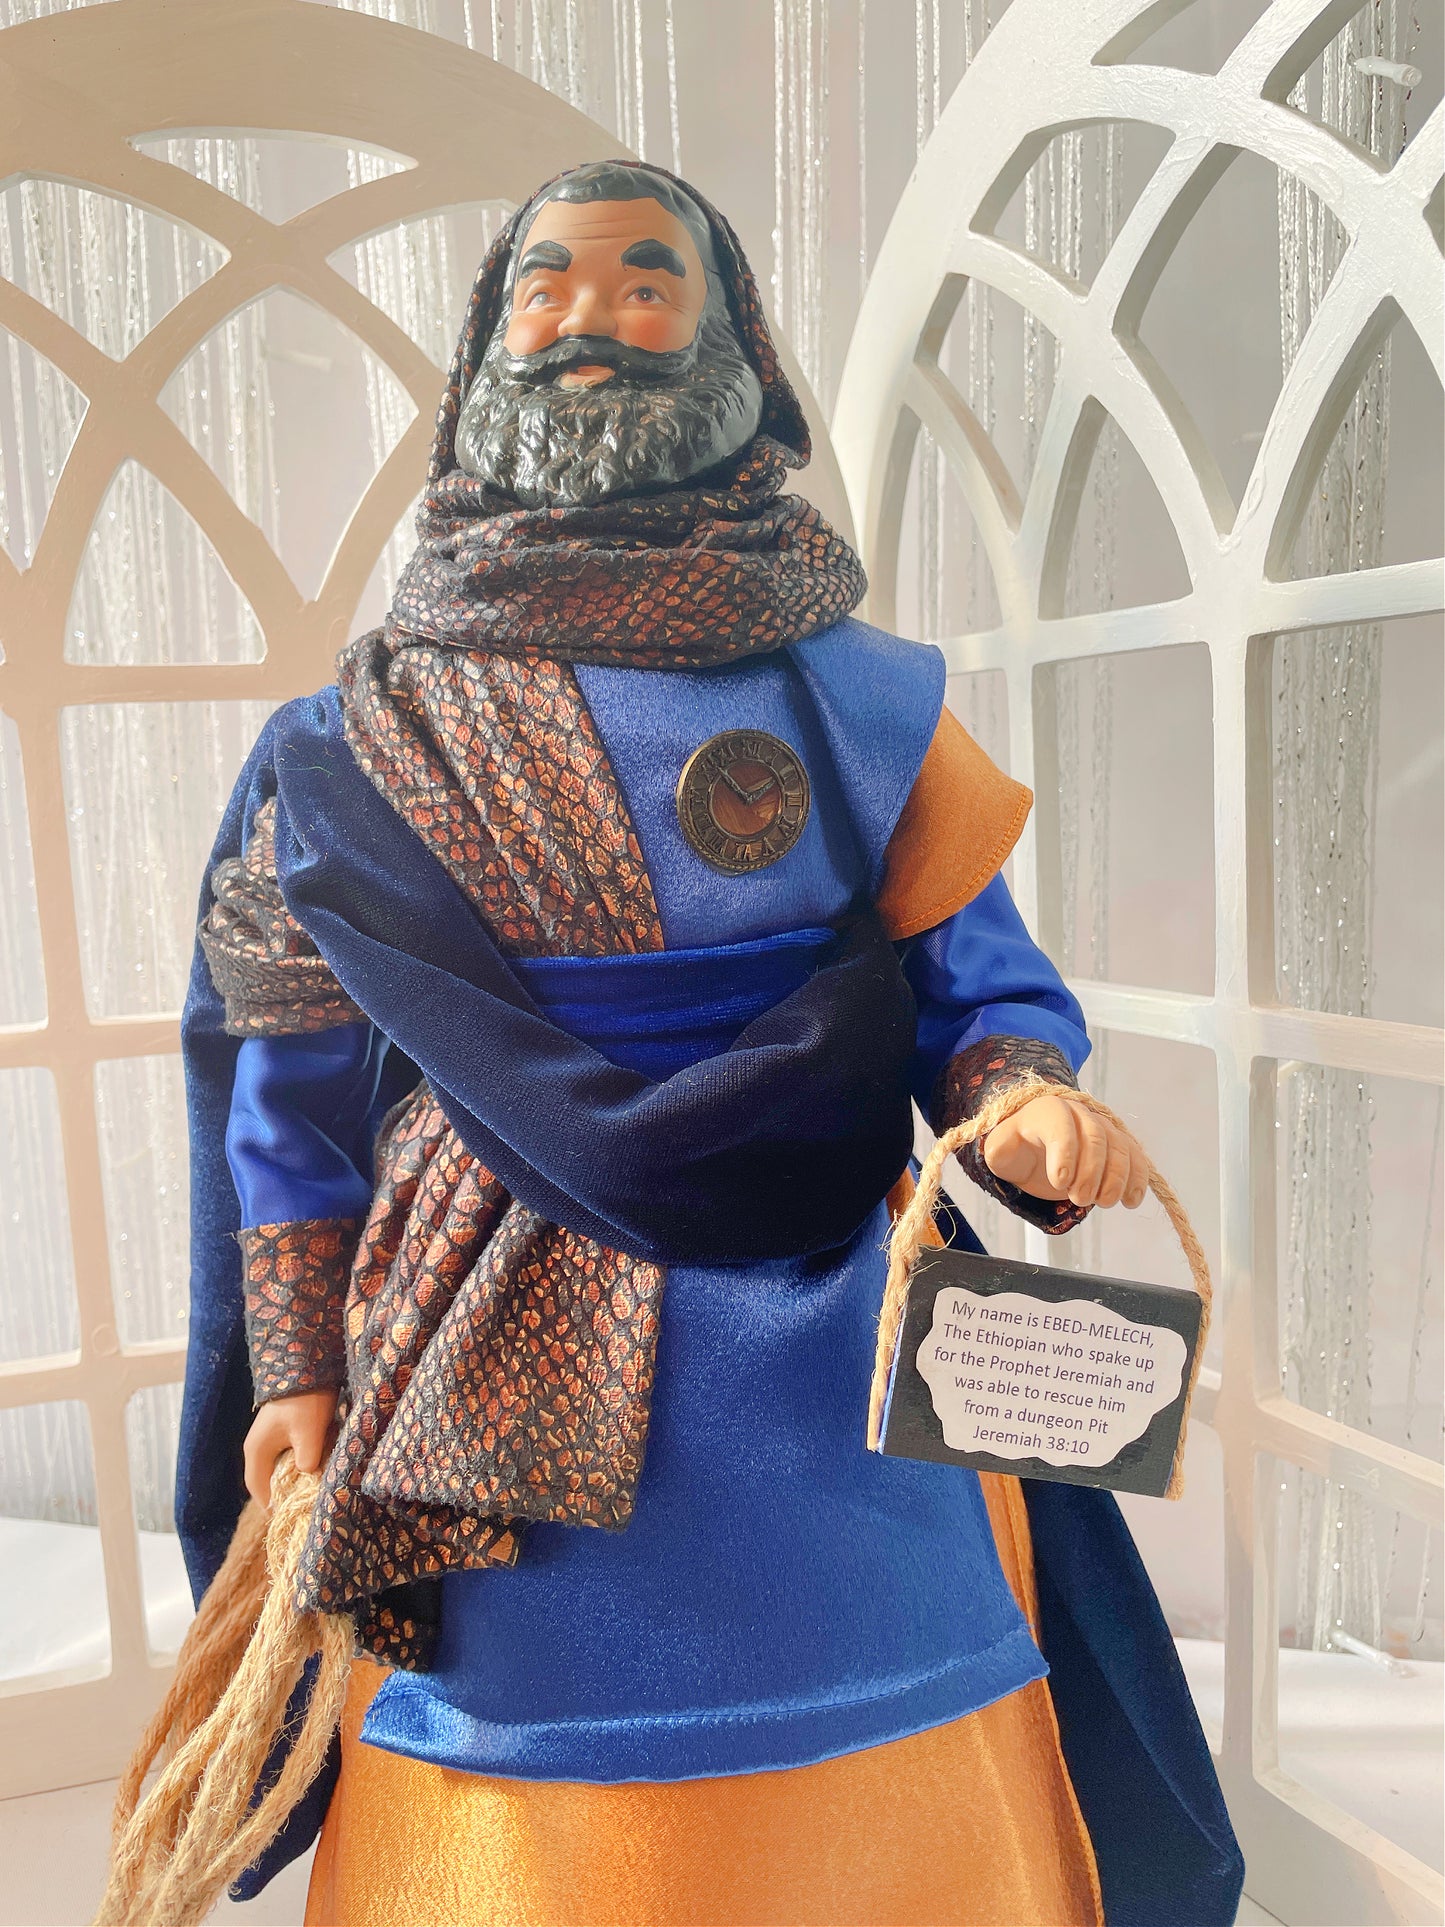 This is Ebed-Melech who saved the Prophet Jeremiah, He is wearing rust and navy blue satin and velvet because he worked in the kings house.